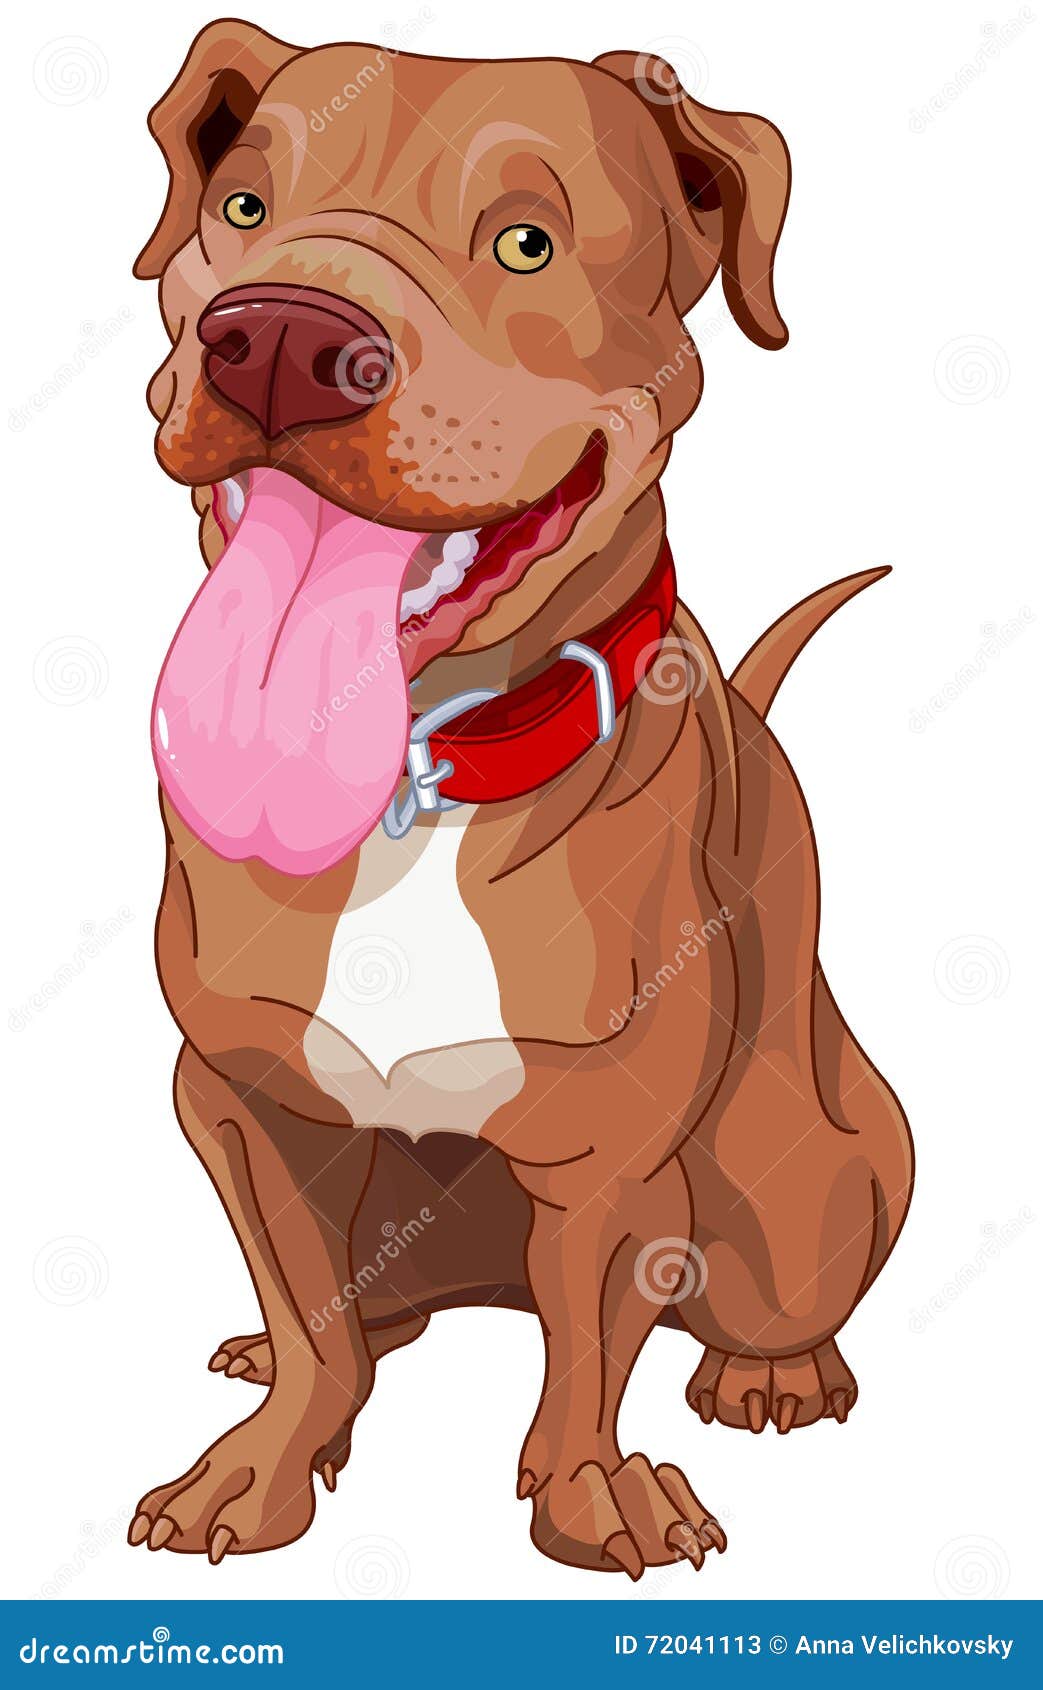 Pit-Bull stock vector. Illustration of drawings, clipart - 72041113